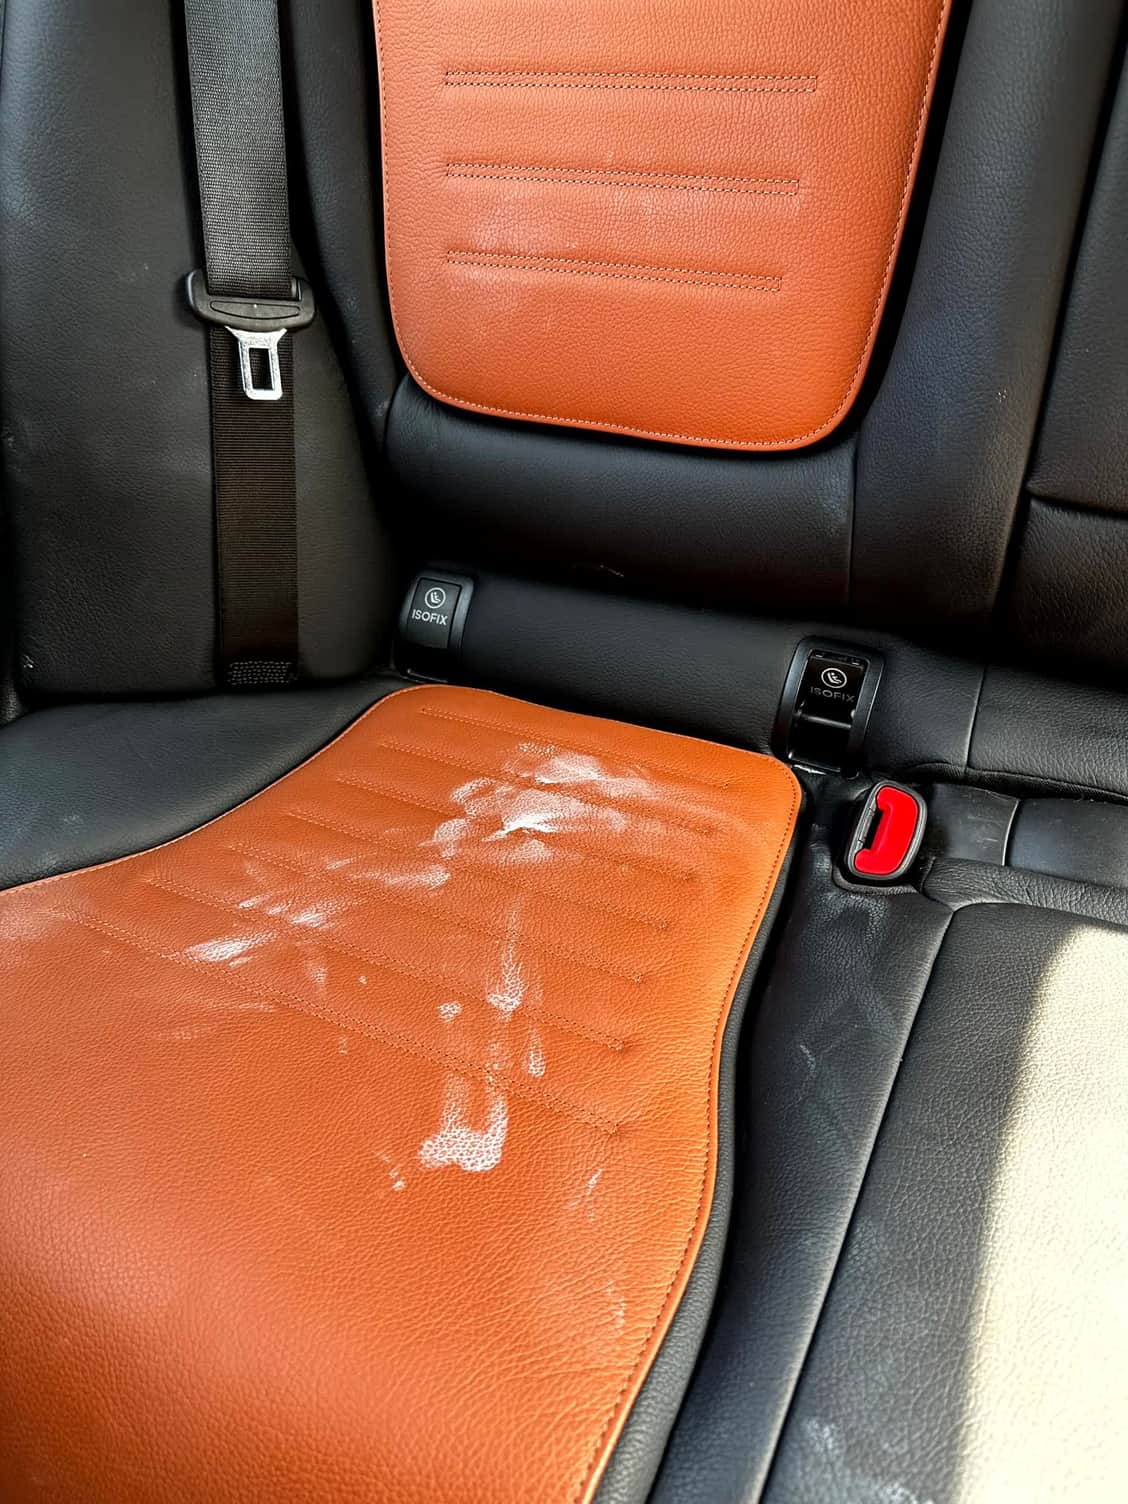 Leather and Interior Cleaner - Interior Cleaning & Care - Adams Forums